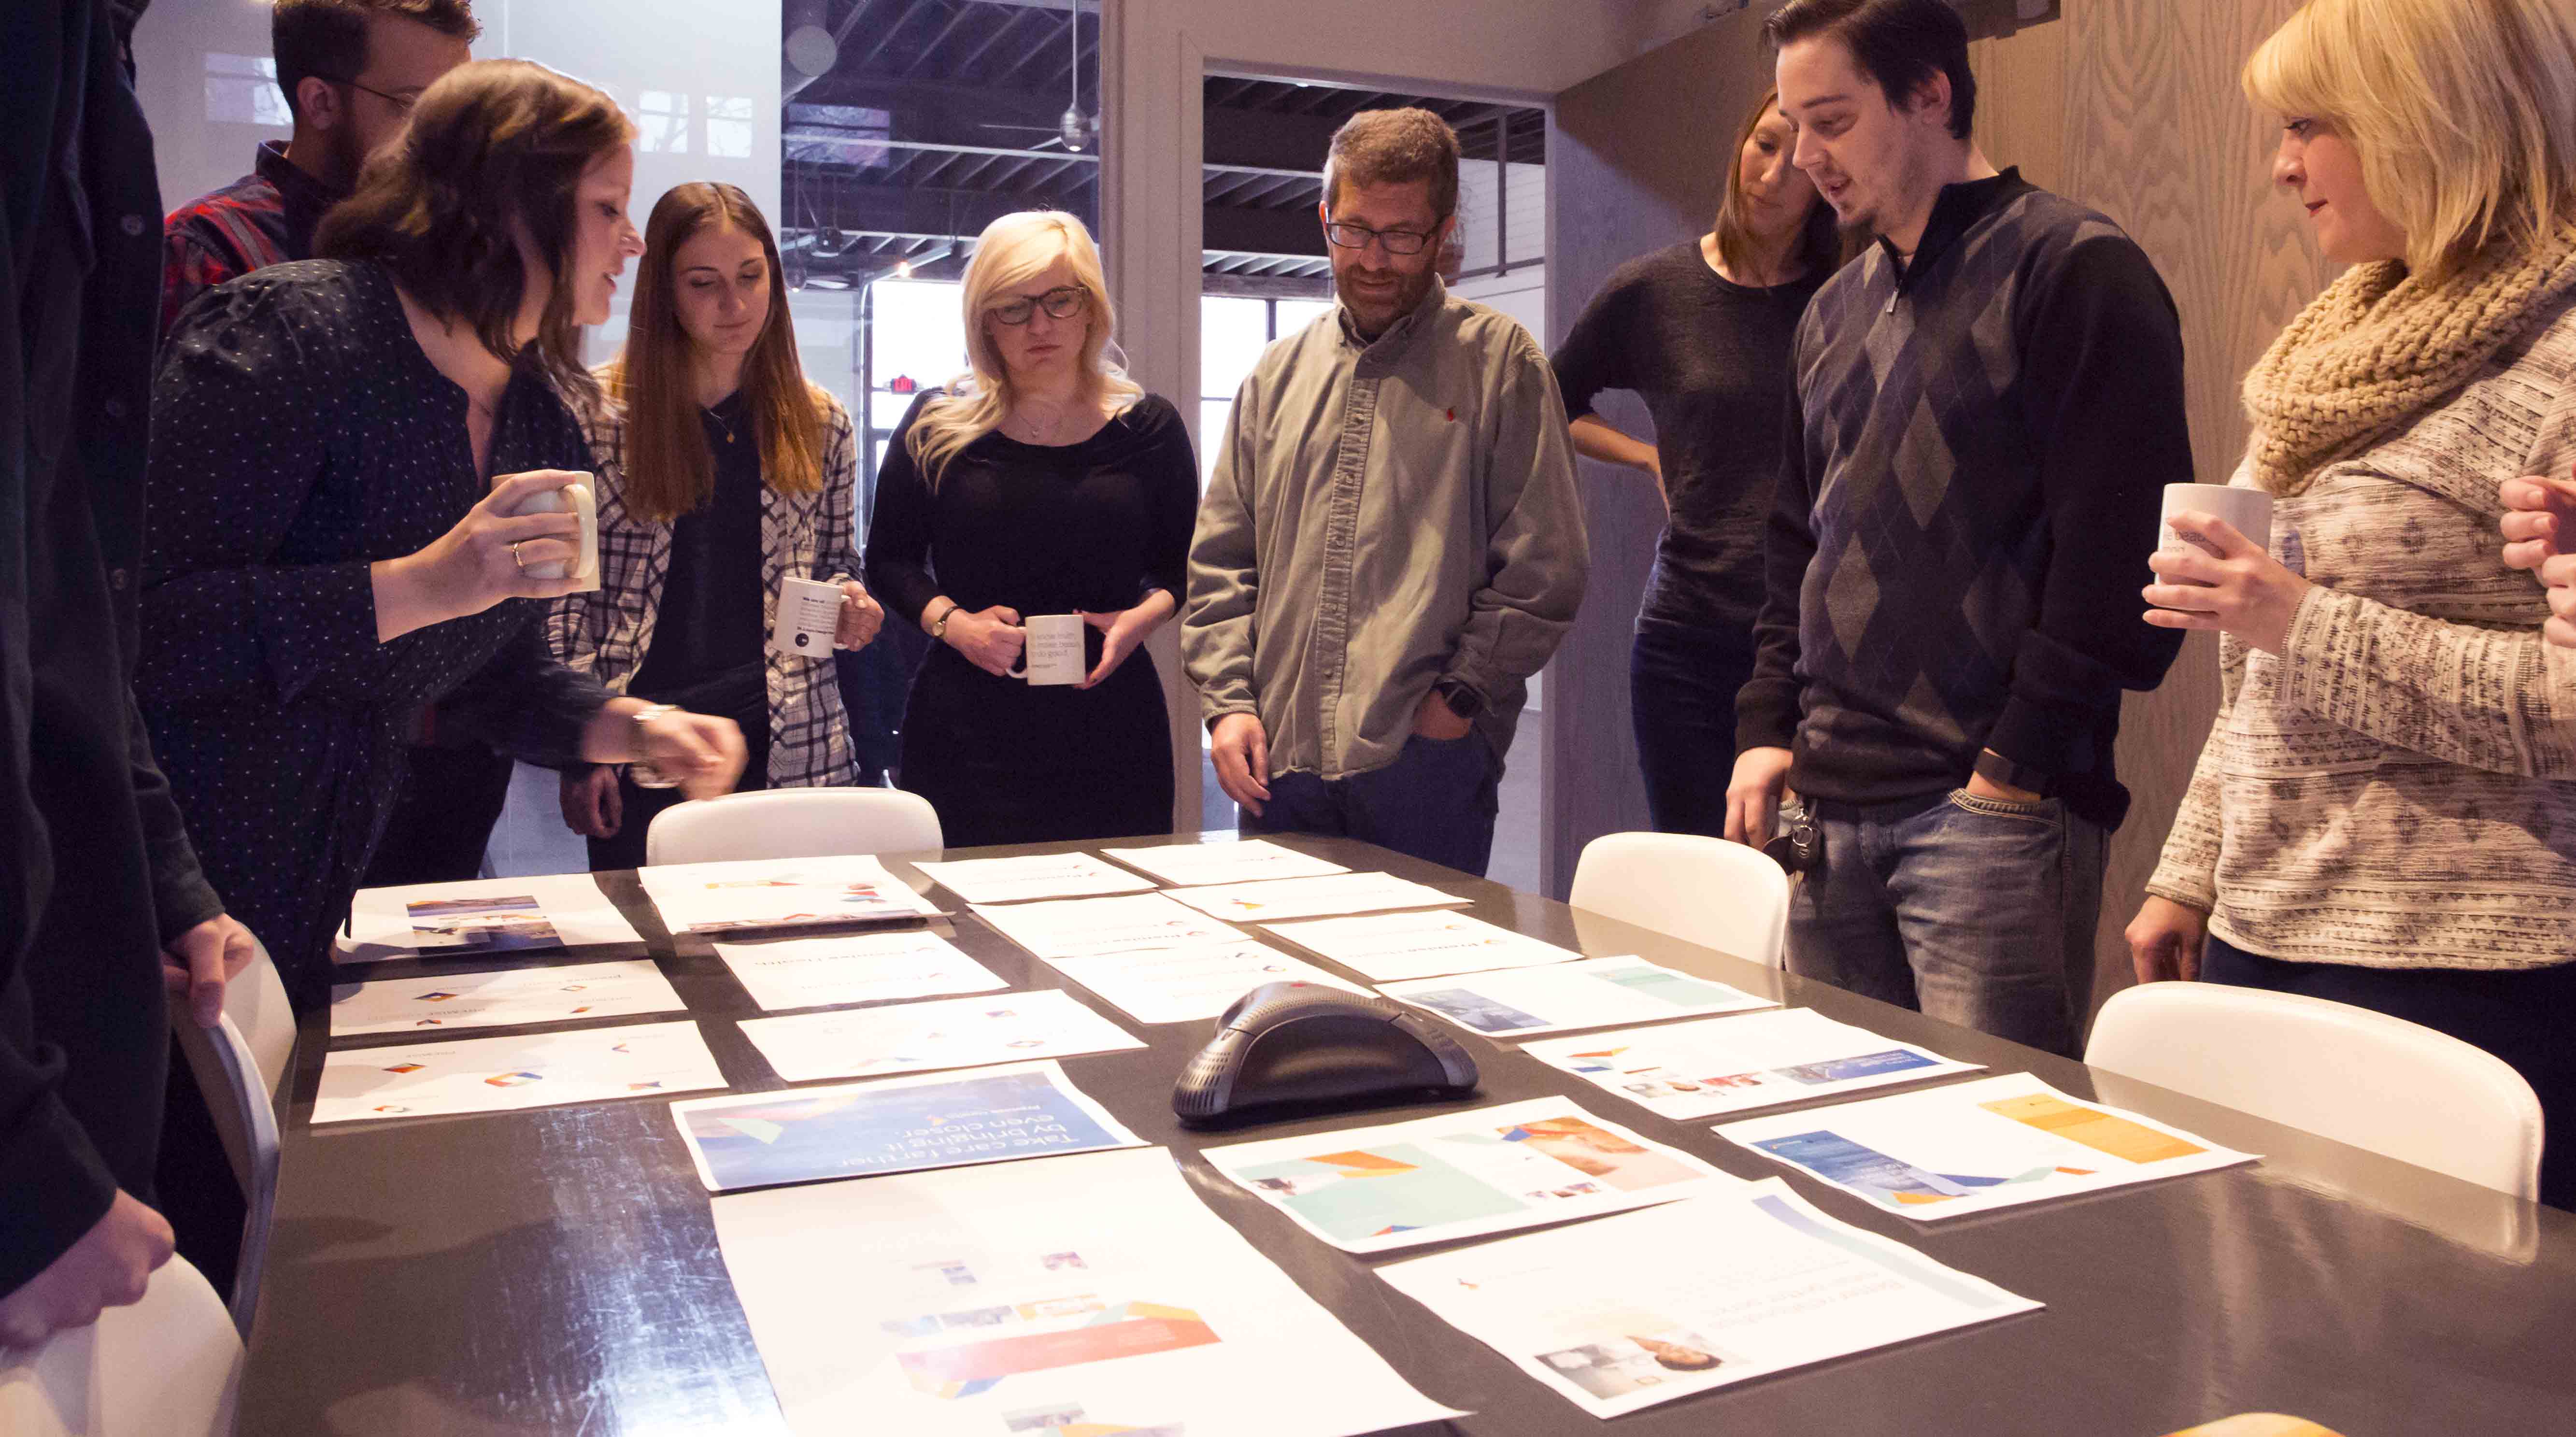 Creatives at Atomicdust looking at designs and discussing a branding project around a table